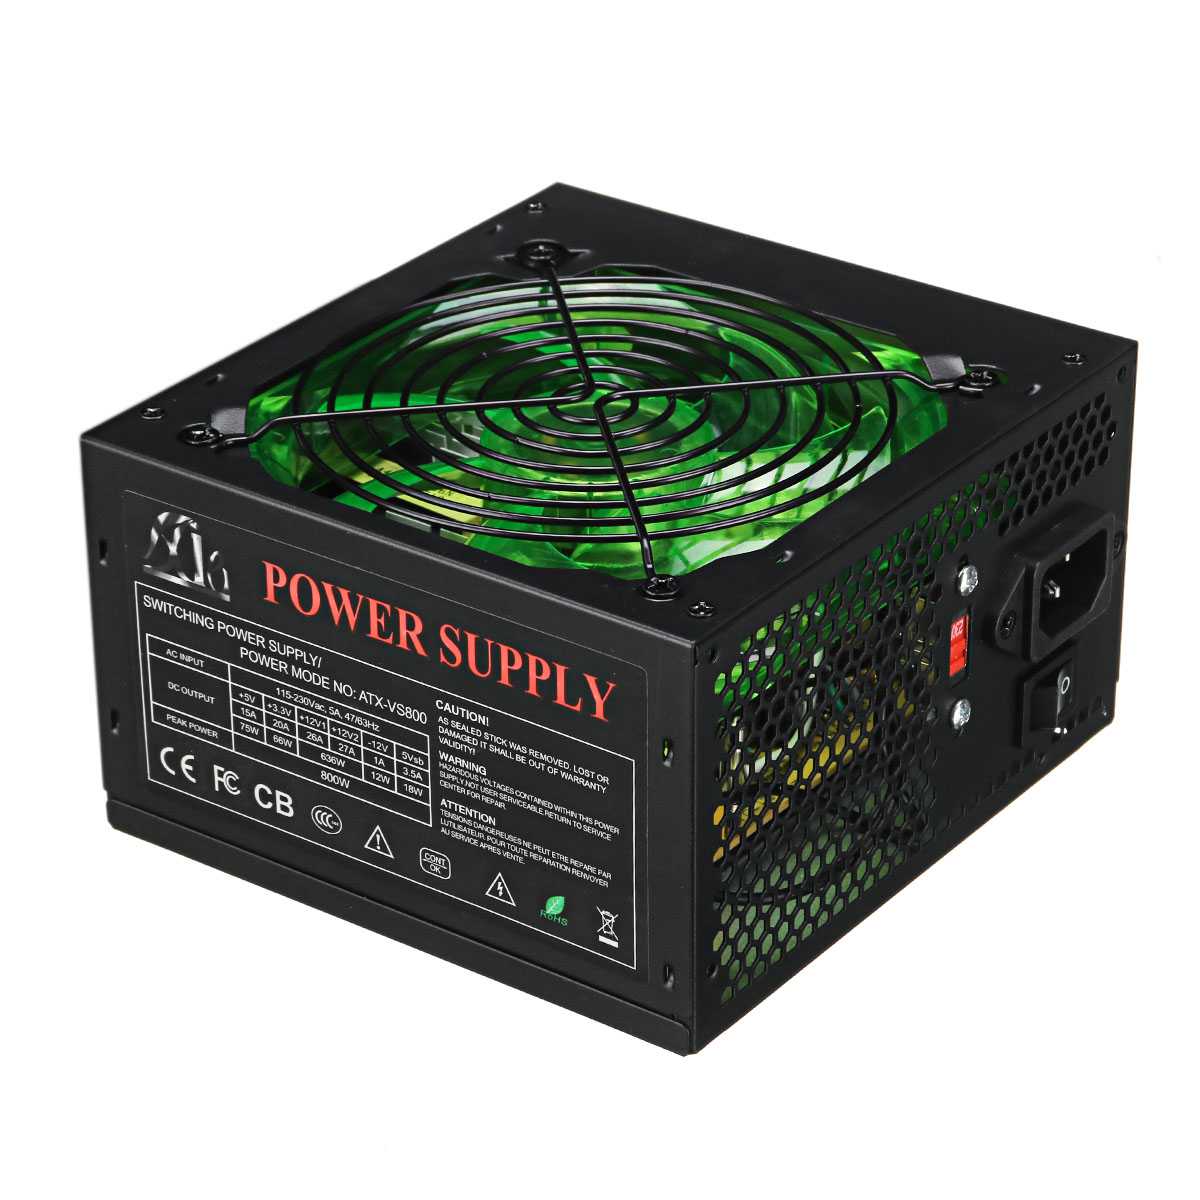 Find 800W 120mm LED Fan 24 Pin PCI SATA ATX 12V Computer Power Supply for PC Desktop for Sale on Gipsybee.com with cryptocurrencies